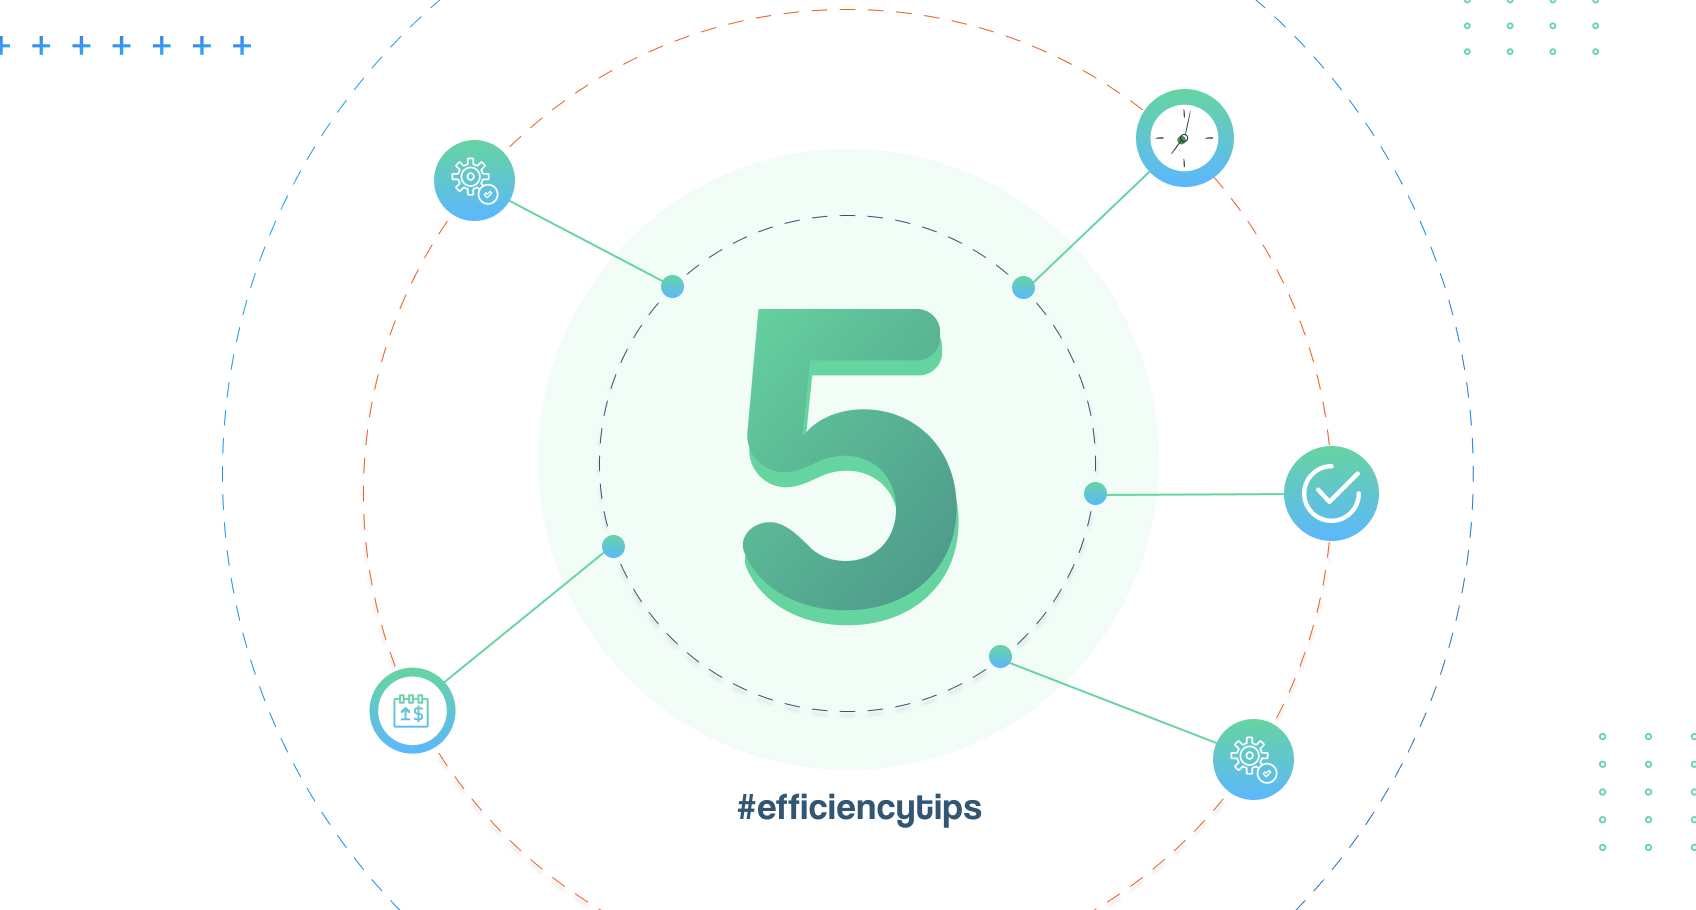 a large green 5 at the centre of the banner with the hashtag '#efficiencytips'